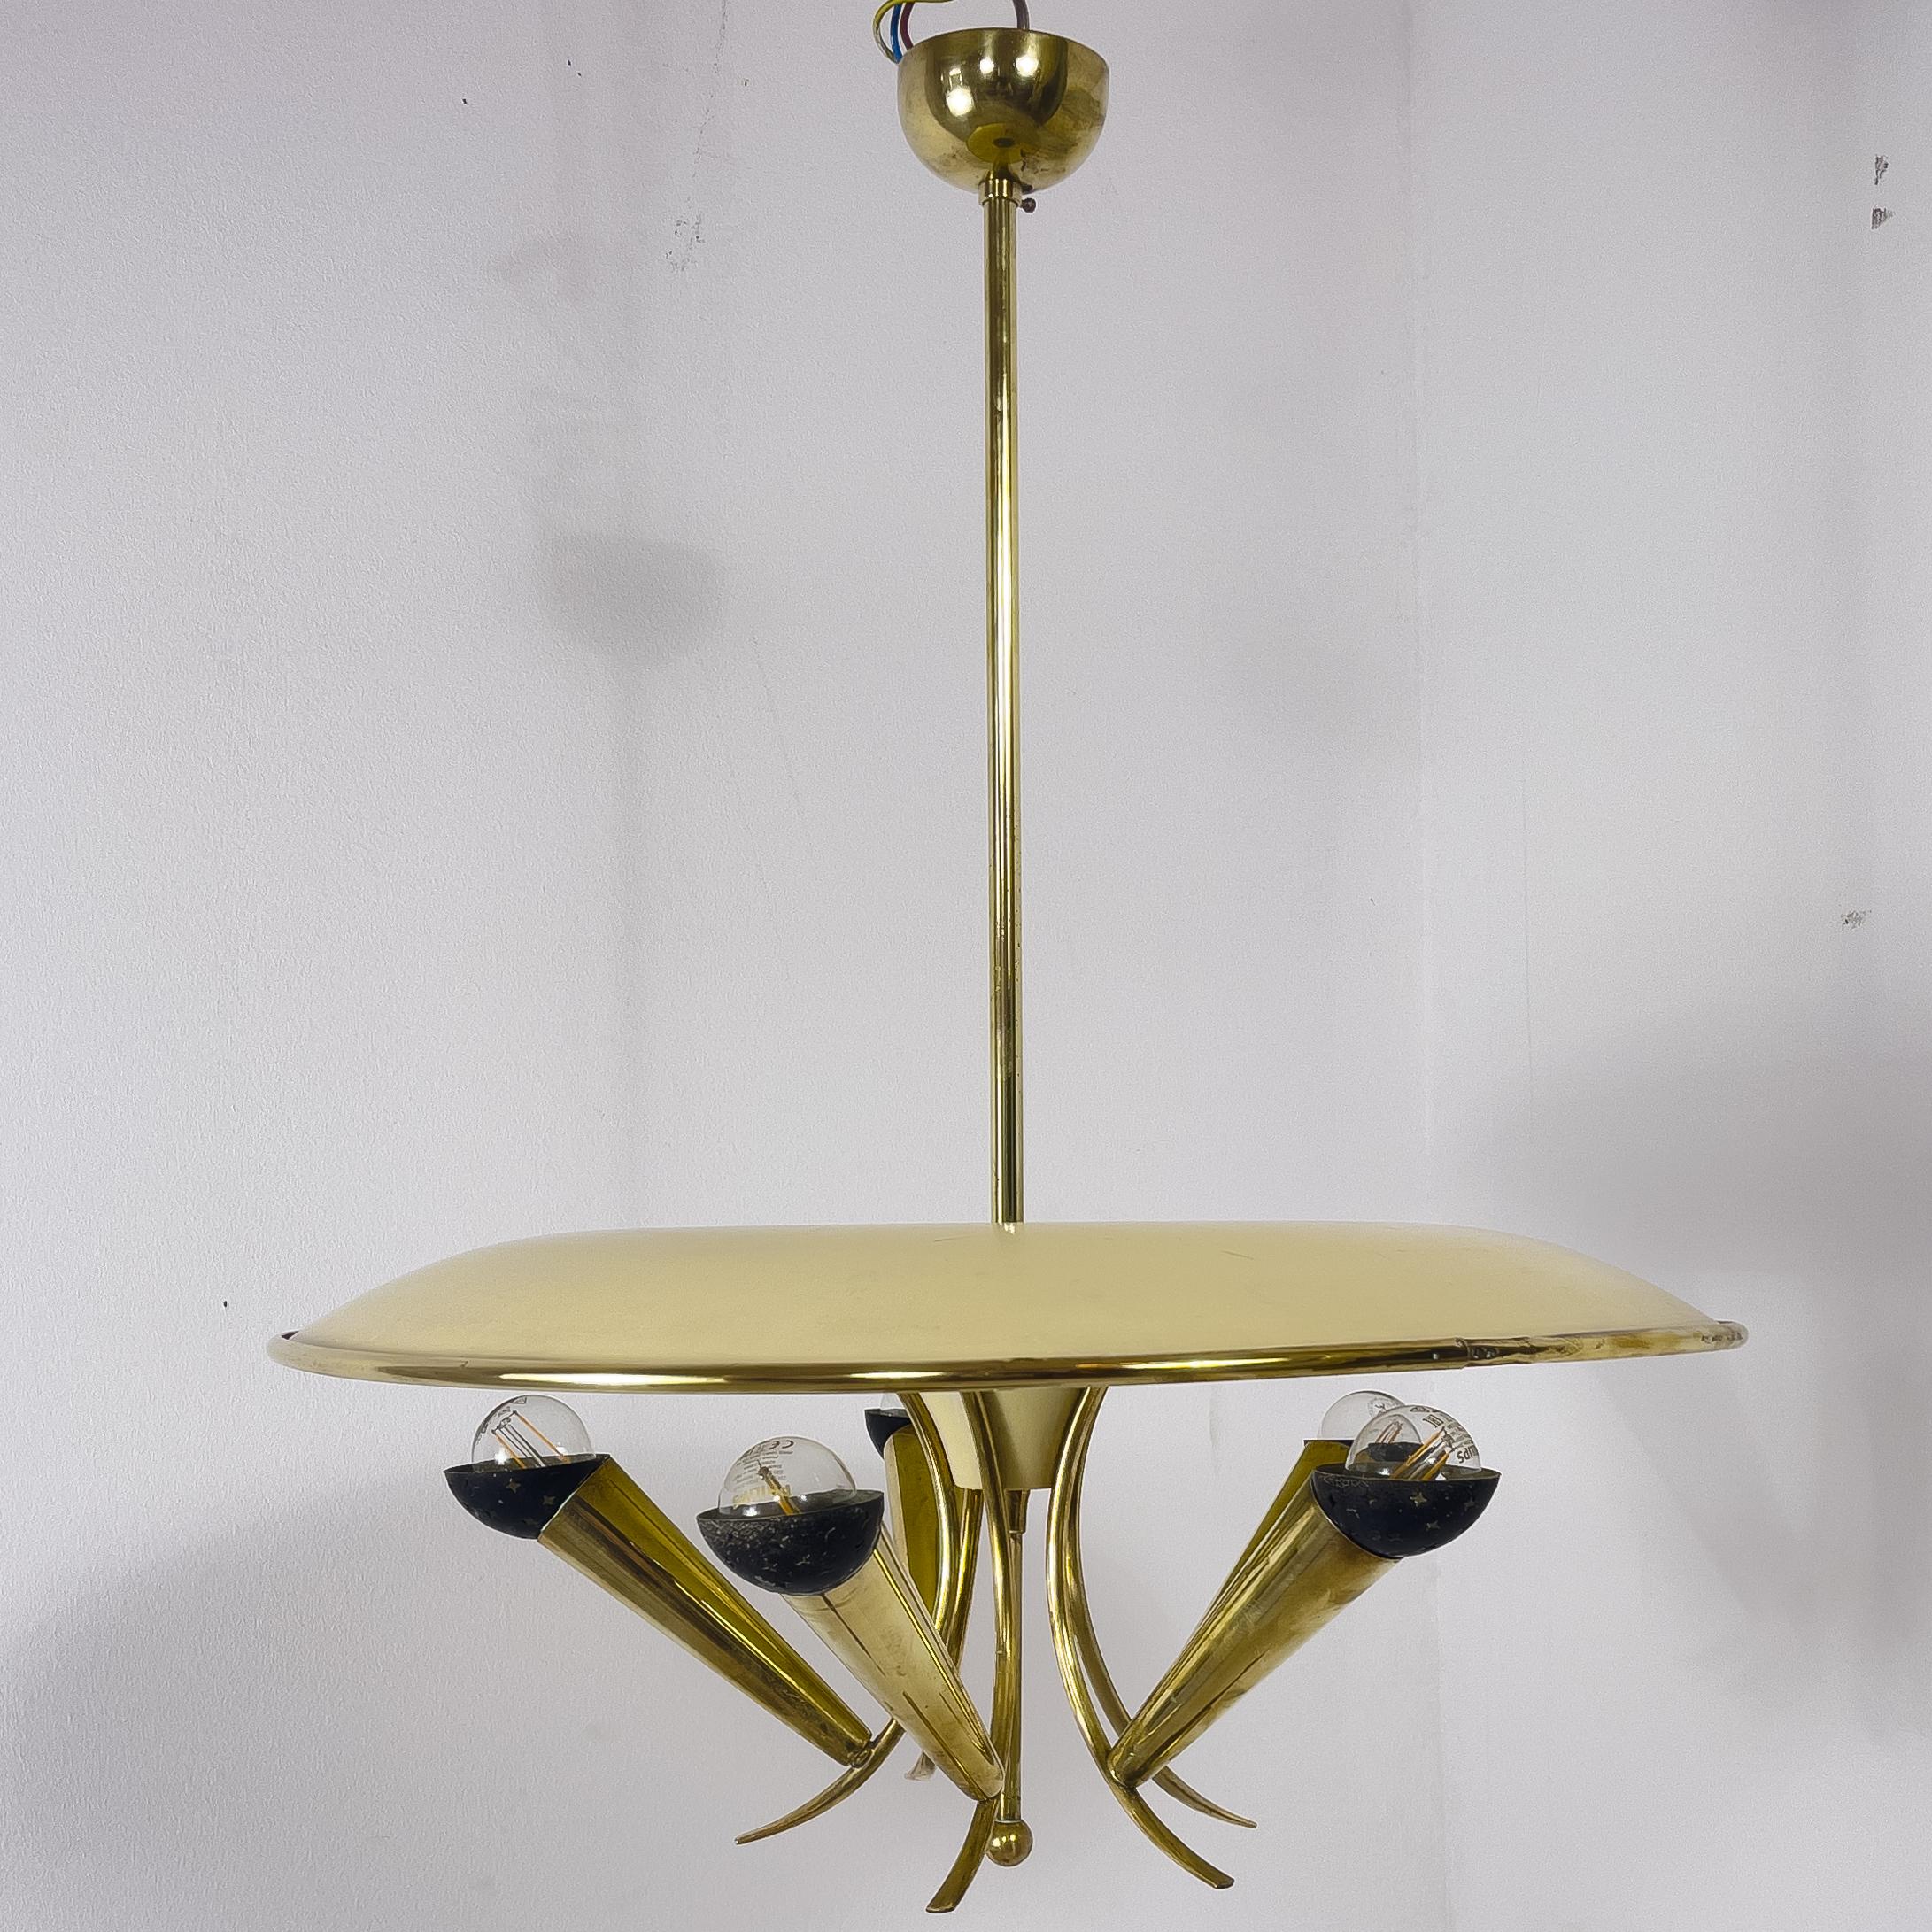 A mid-century Italian round brass chandelier. The nature of the design and the quality lead to an attribution by Stilnovo. The Italian brass chandelier is manufactured in Italy around 1955 and consists of five brass branches with star-shaped